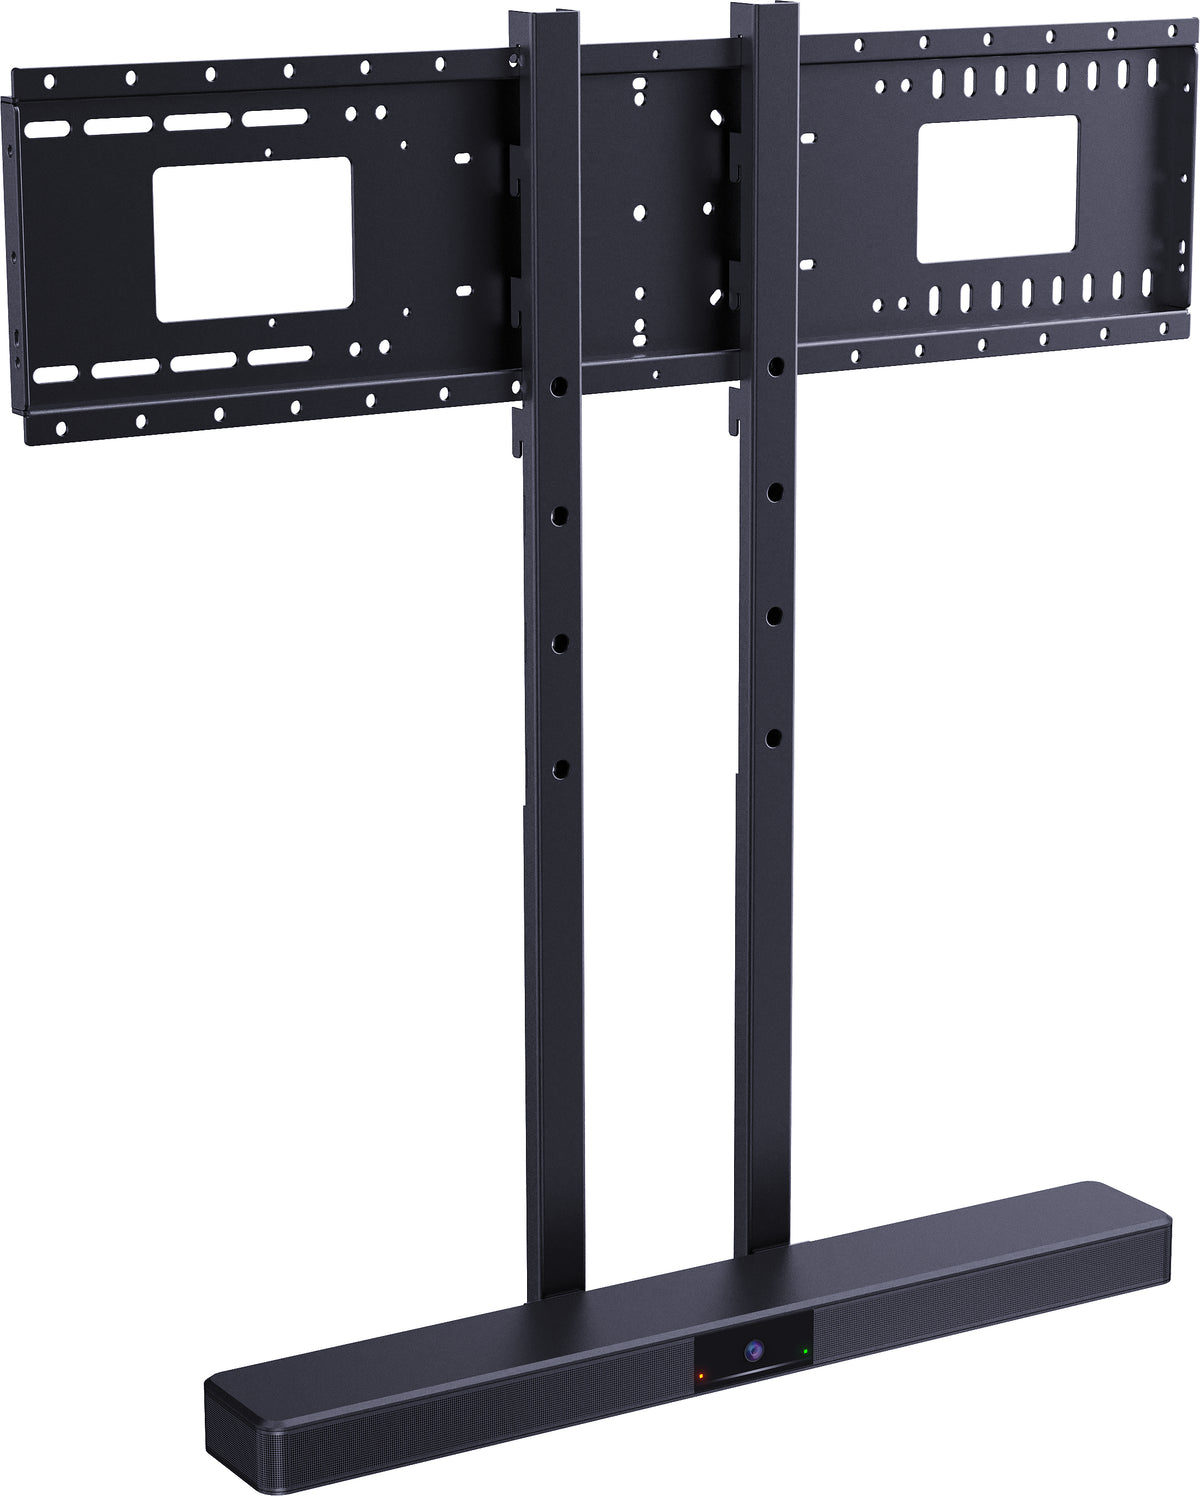 VISION Laptop Shelf - LIFETIME WARRANTY - hangs from VFM-W Heavy Duty Wall Mounts - three height options at 80 mm, 3.1" increments - max drop 700 mm, 27.6" below center of screen - also compatible with VFM-F40 floor stands - black